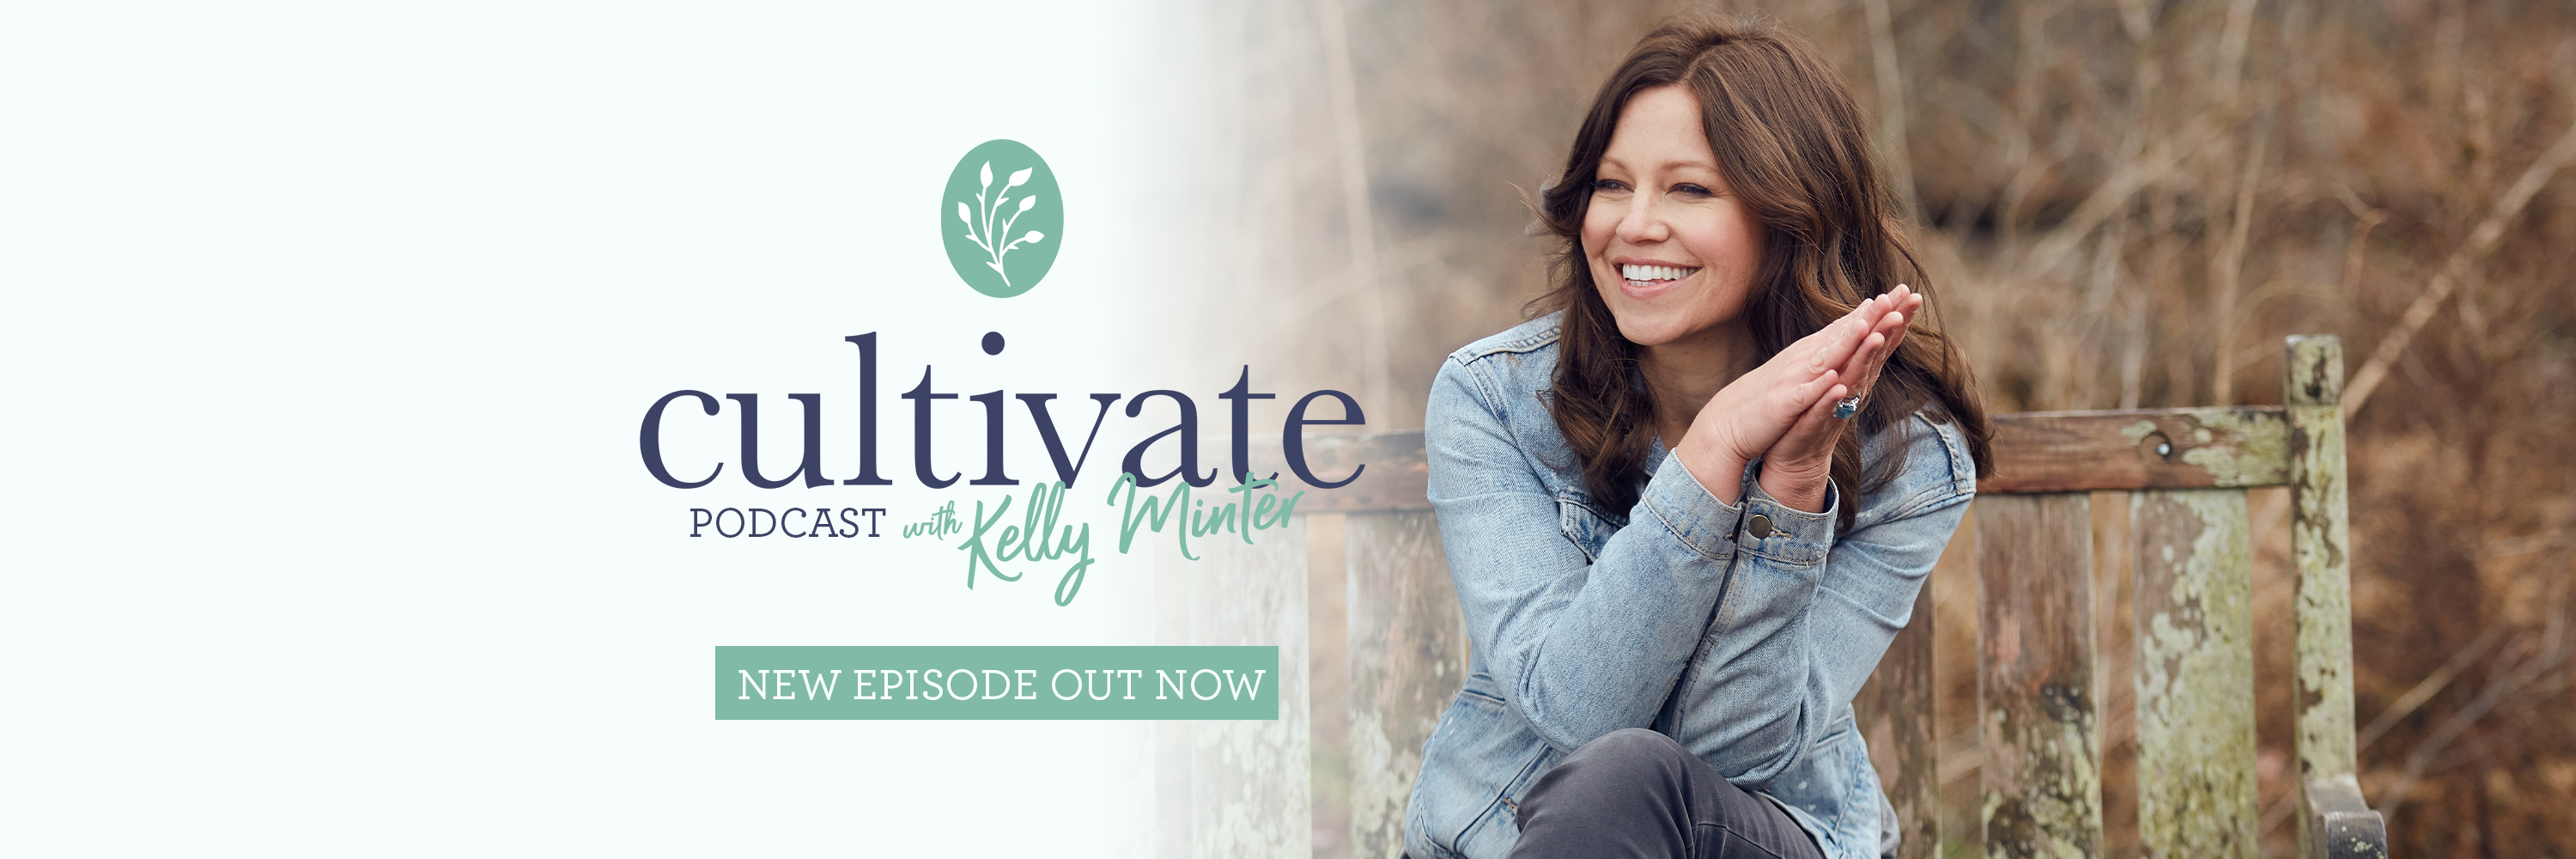 Cultivate with Kelly Minter - New Episode Out Now